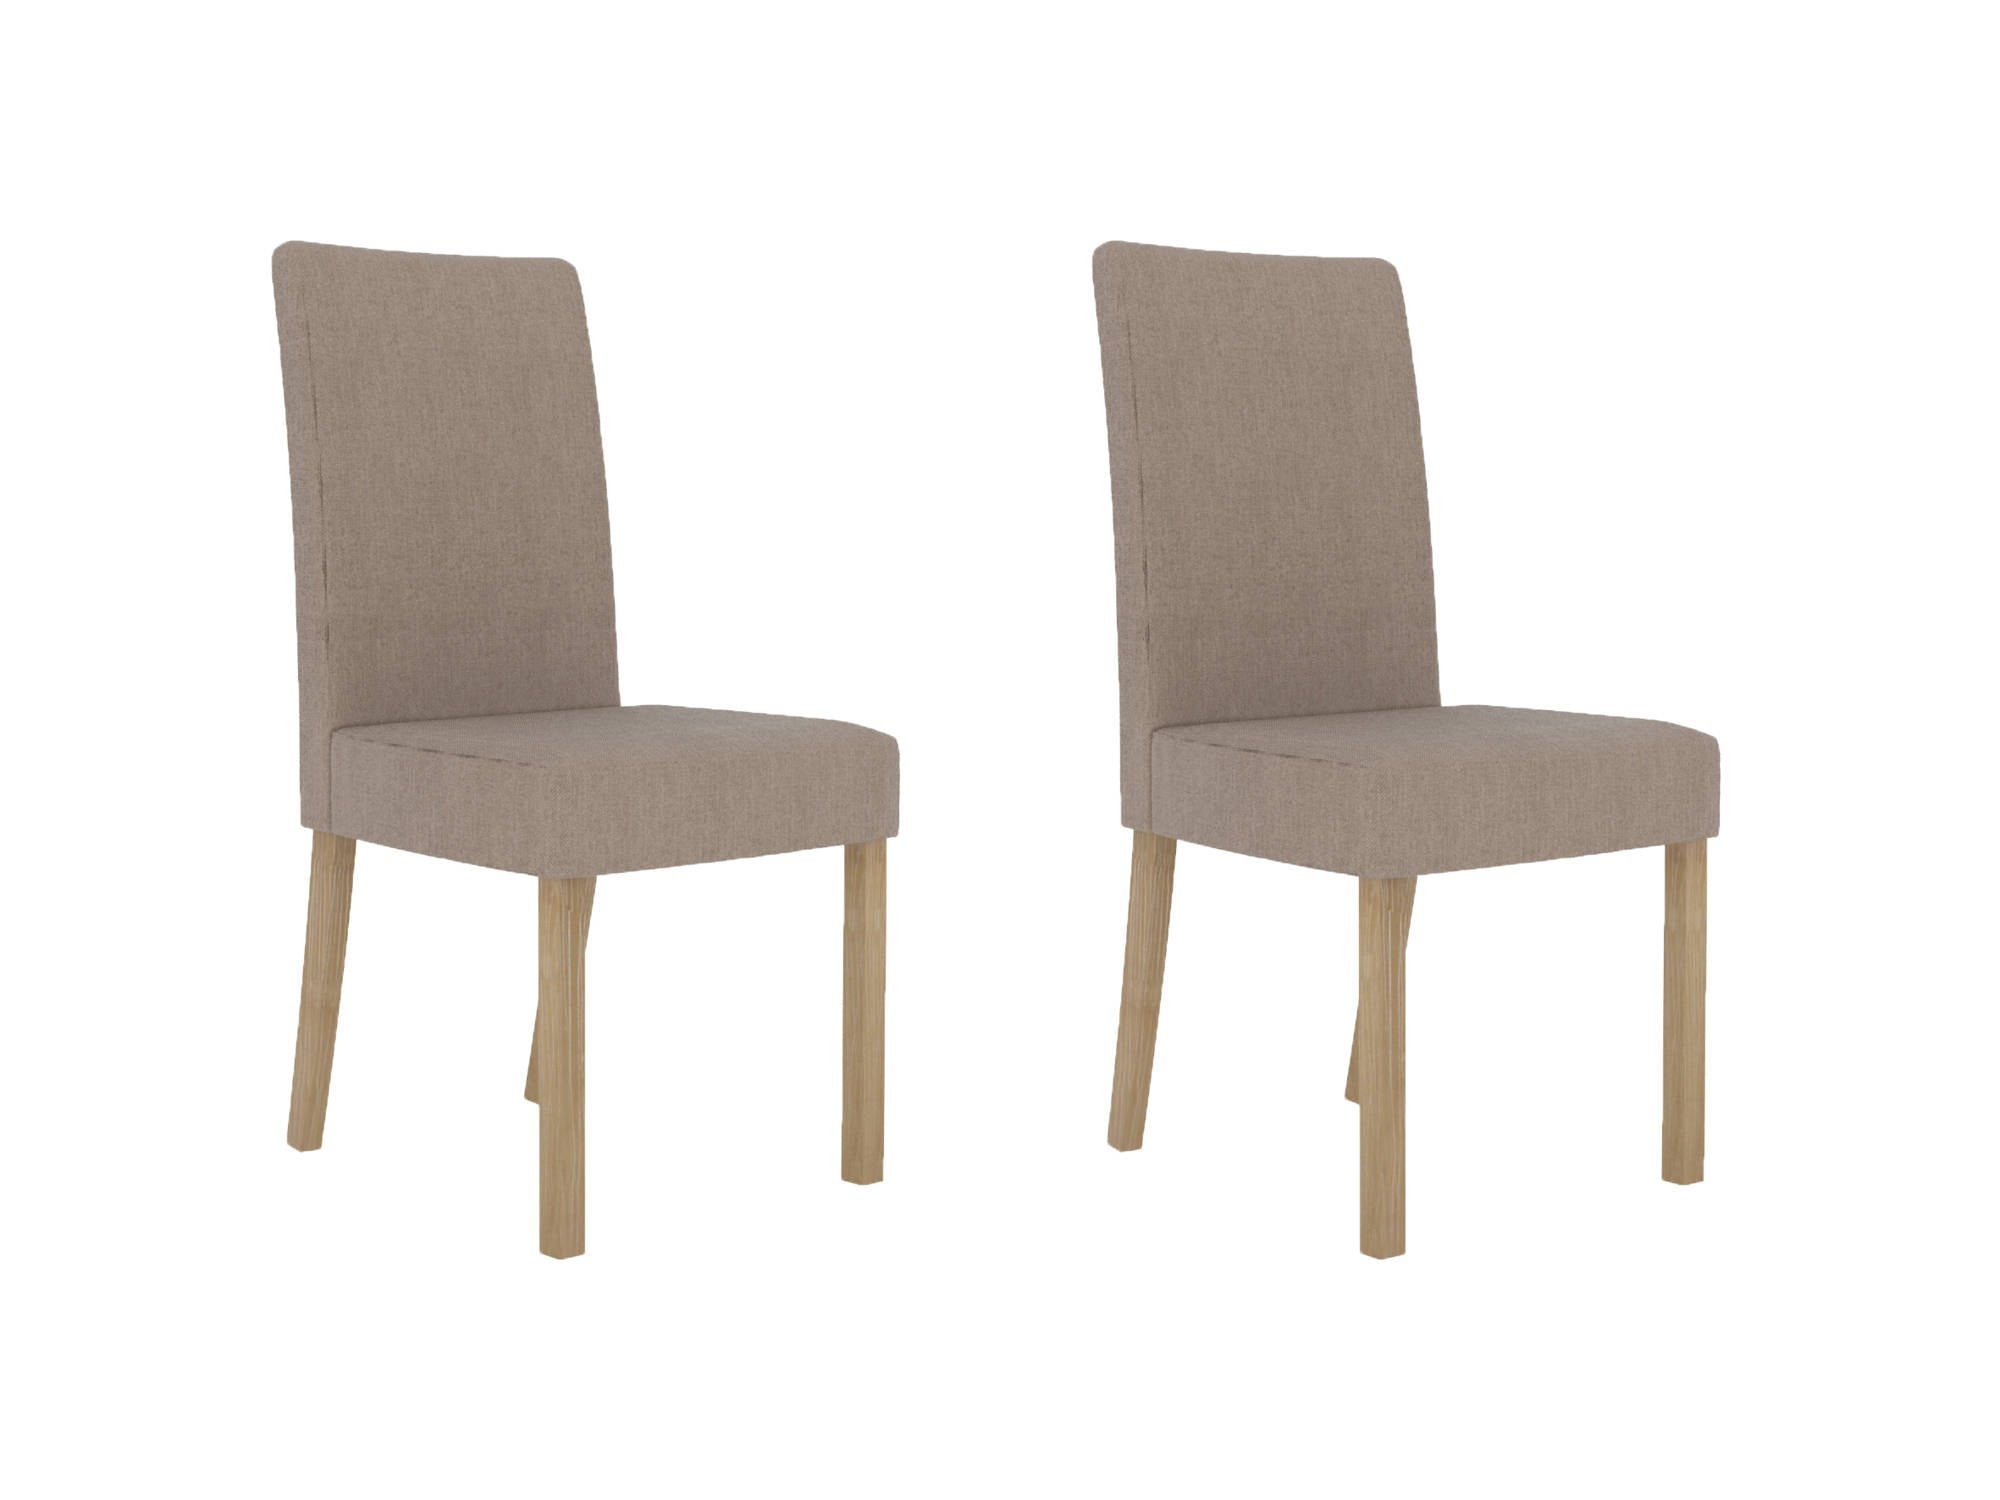 Carillon Dining Chairs in Beige - Ezzo